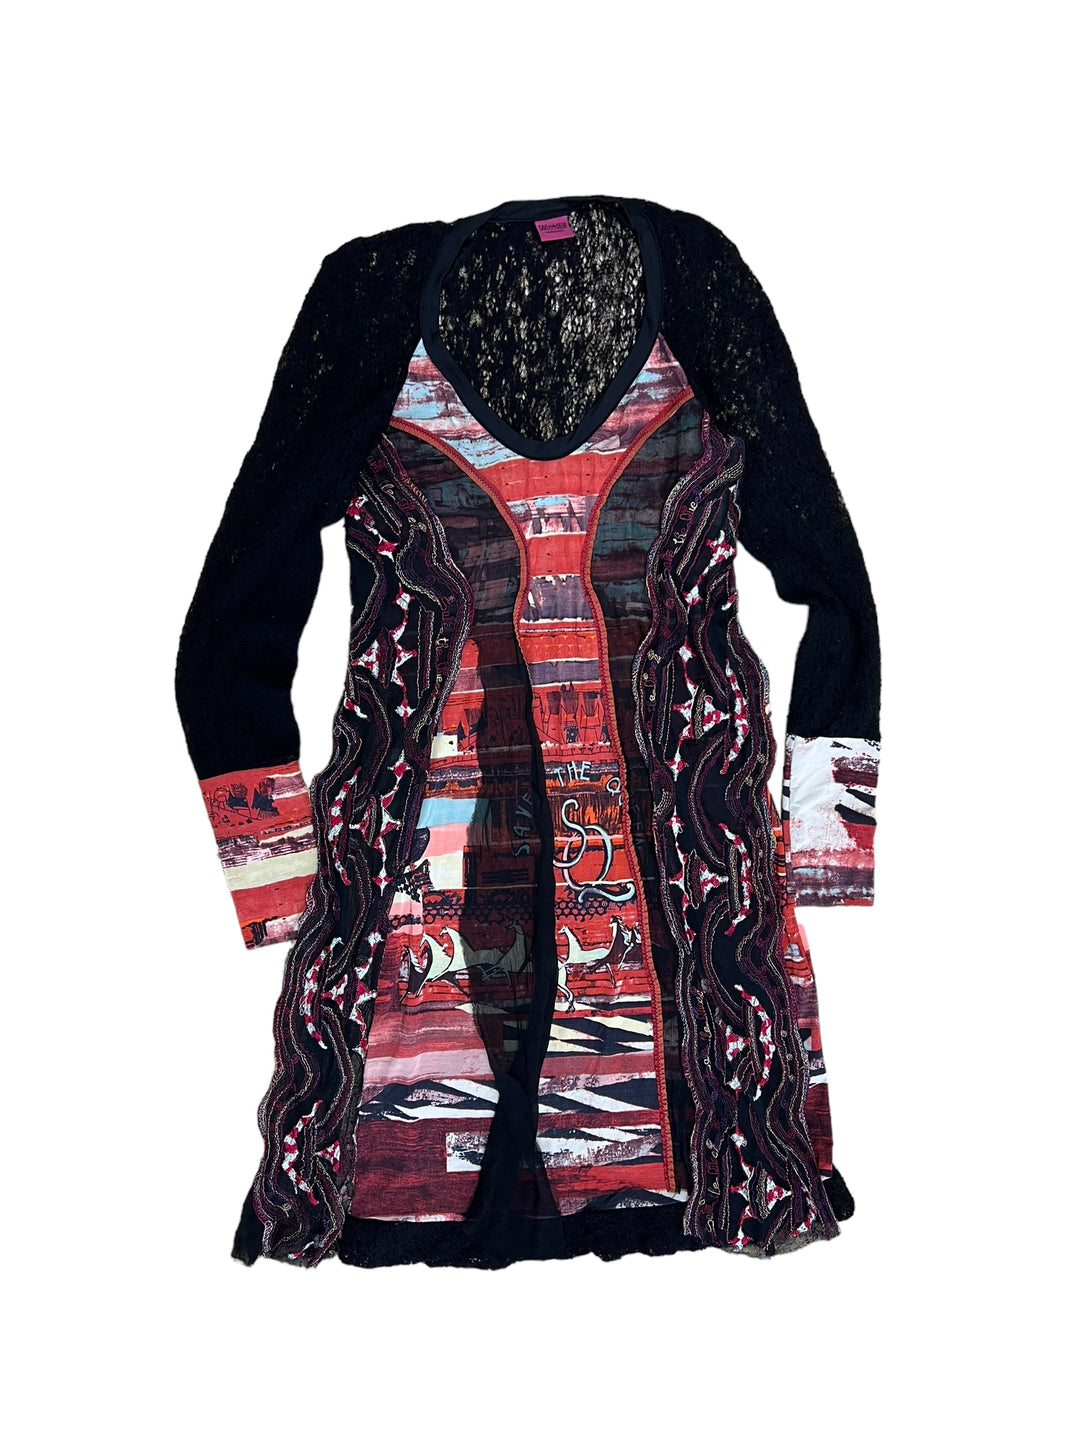 Save the Queen y2k all over print knit dress women’s small